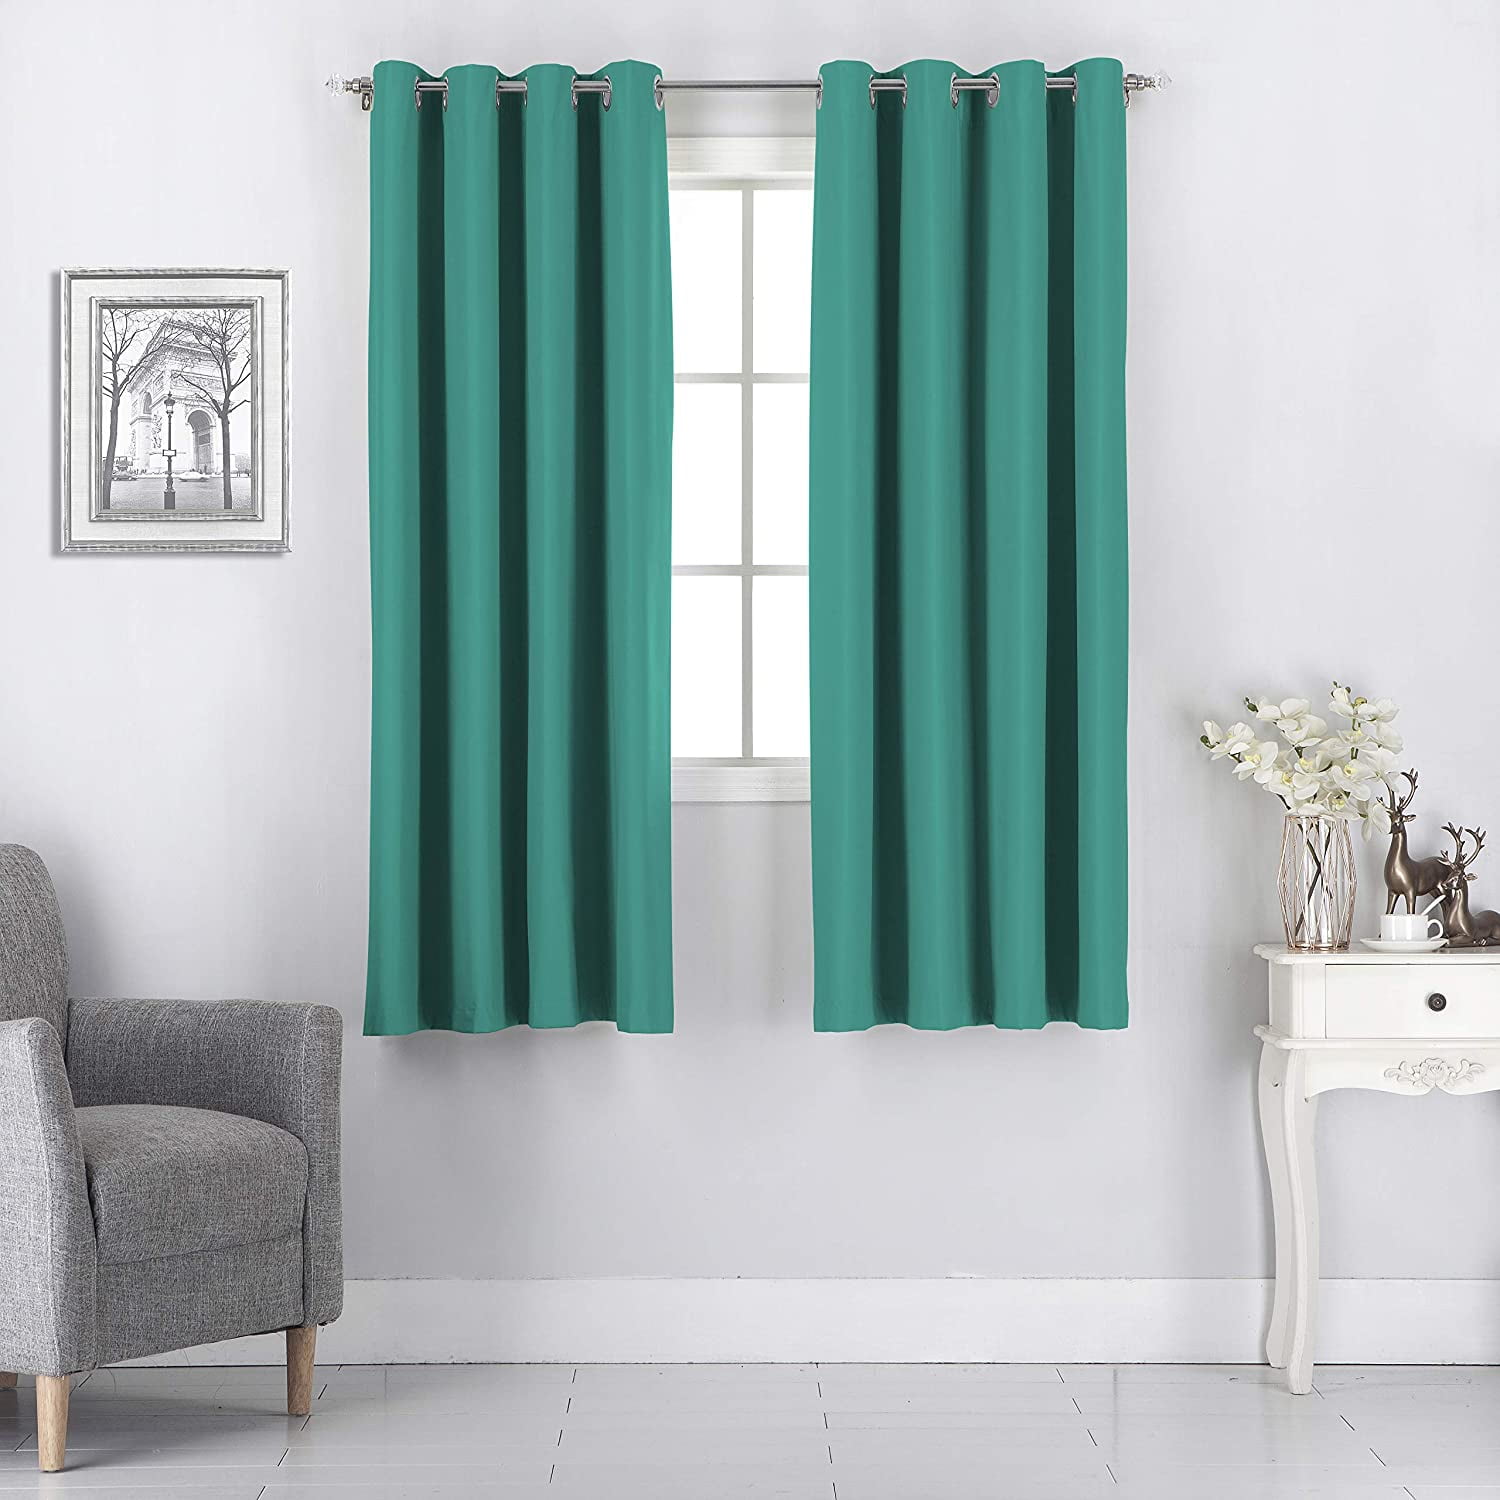 1 Pair Blackout Curtain Panels Bedroom Thermal Insulated Drape Window Treatment 